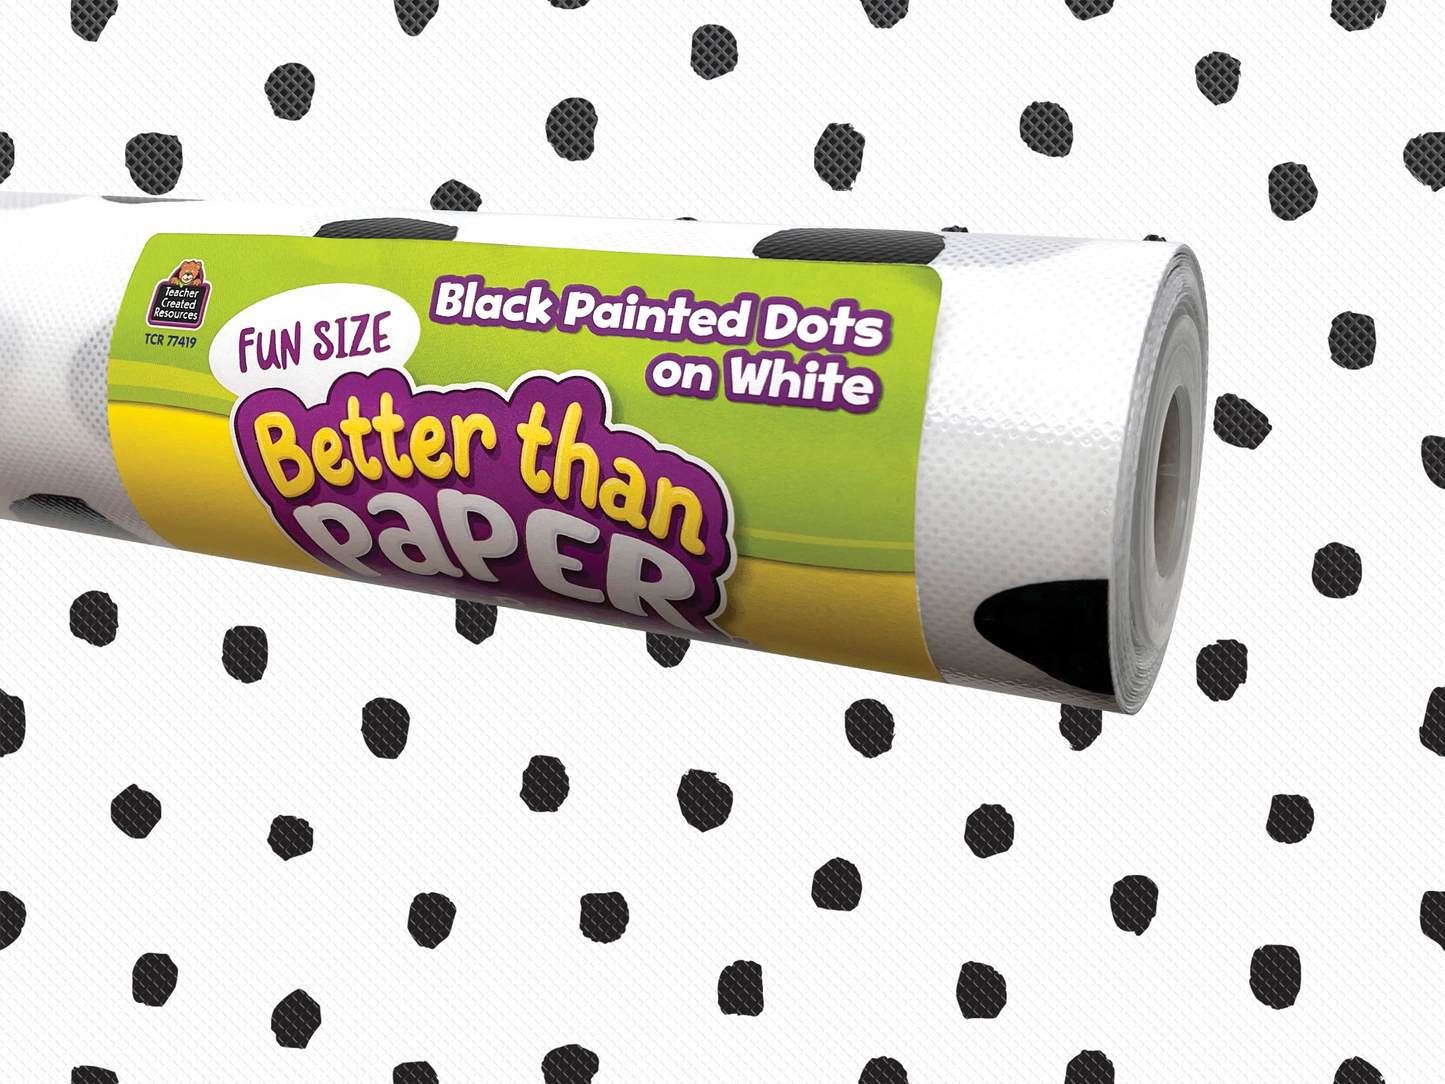 Fun Size Black Painted Dots on White Better Than Paper® Bulletin Board Roll